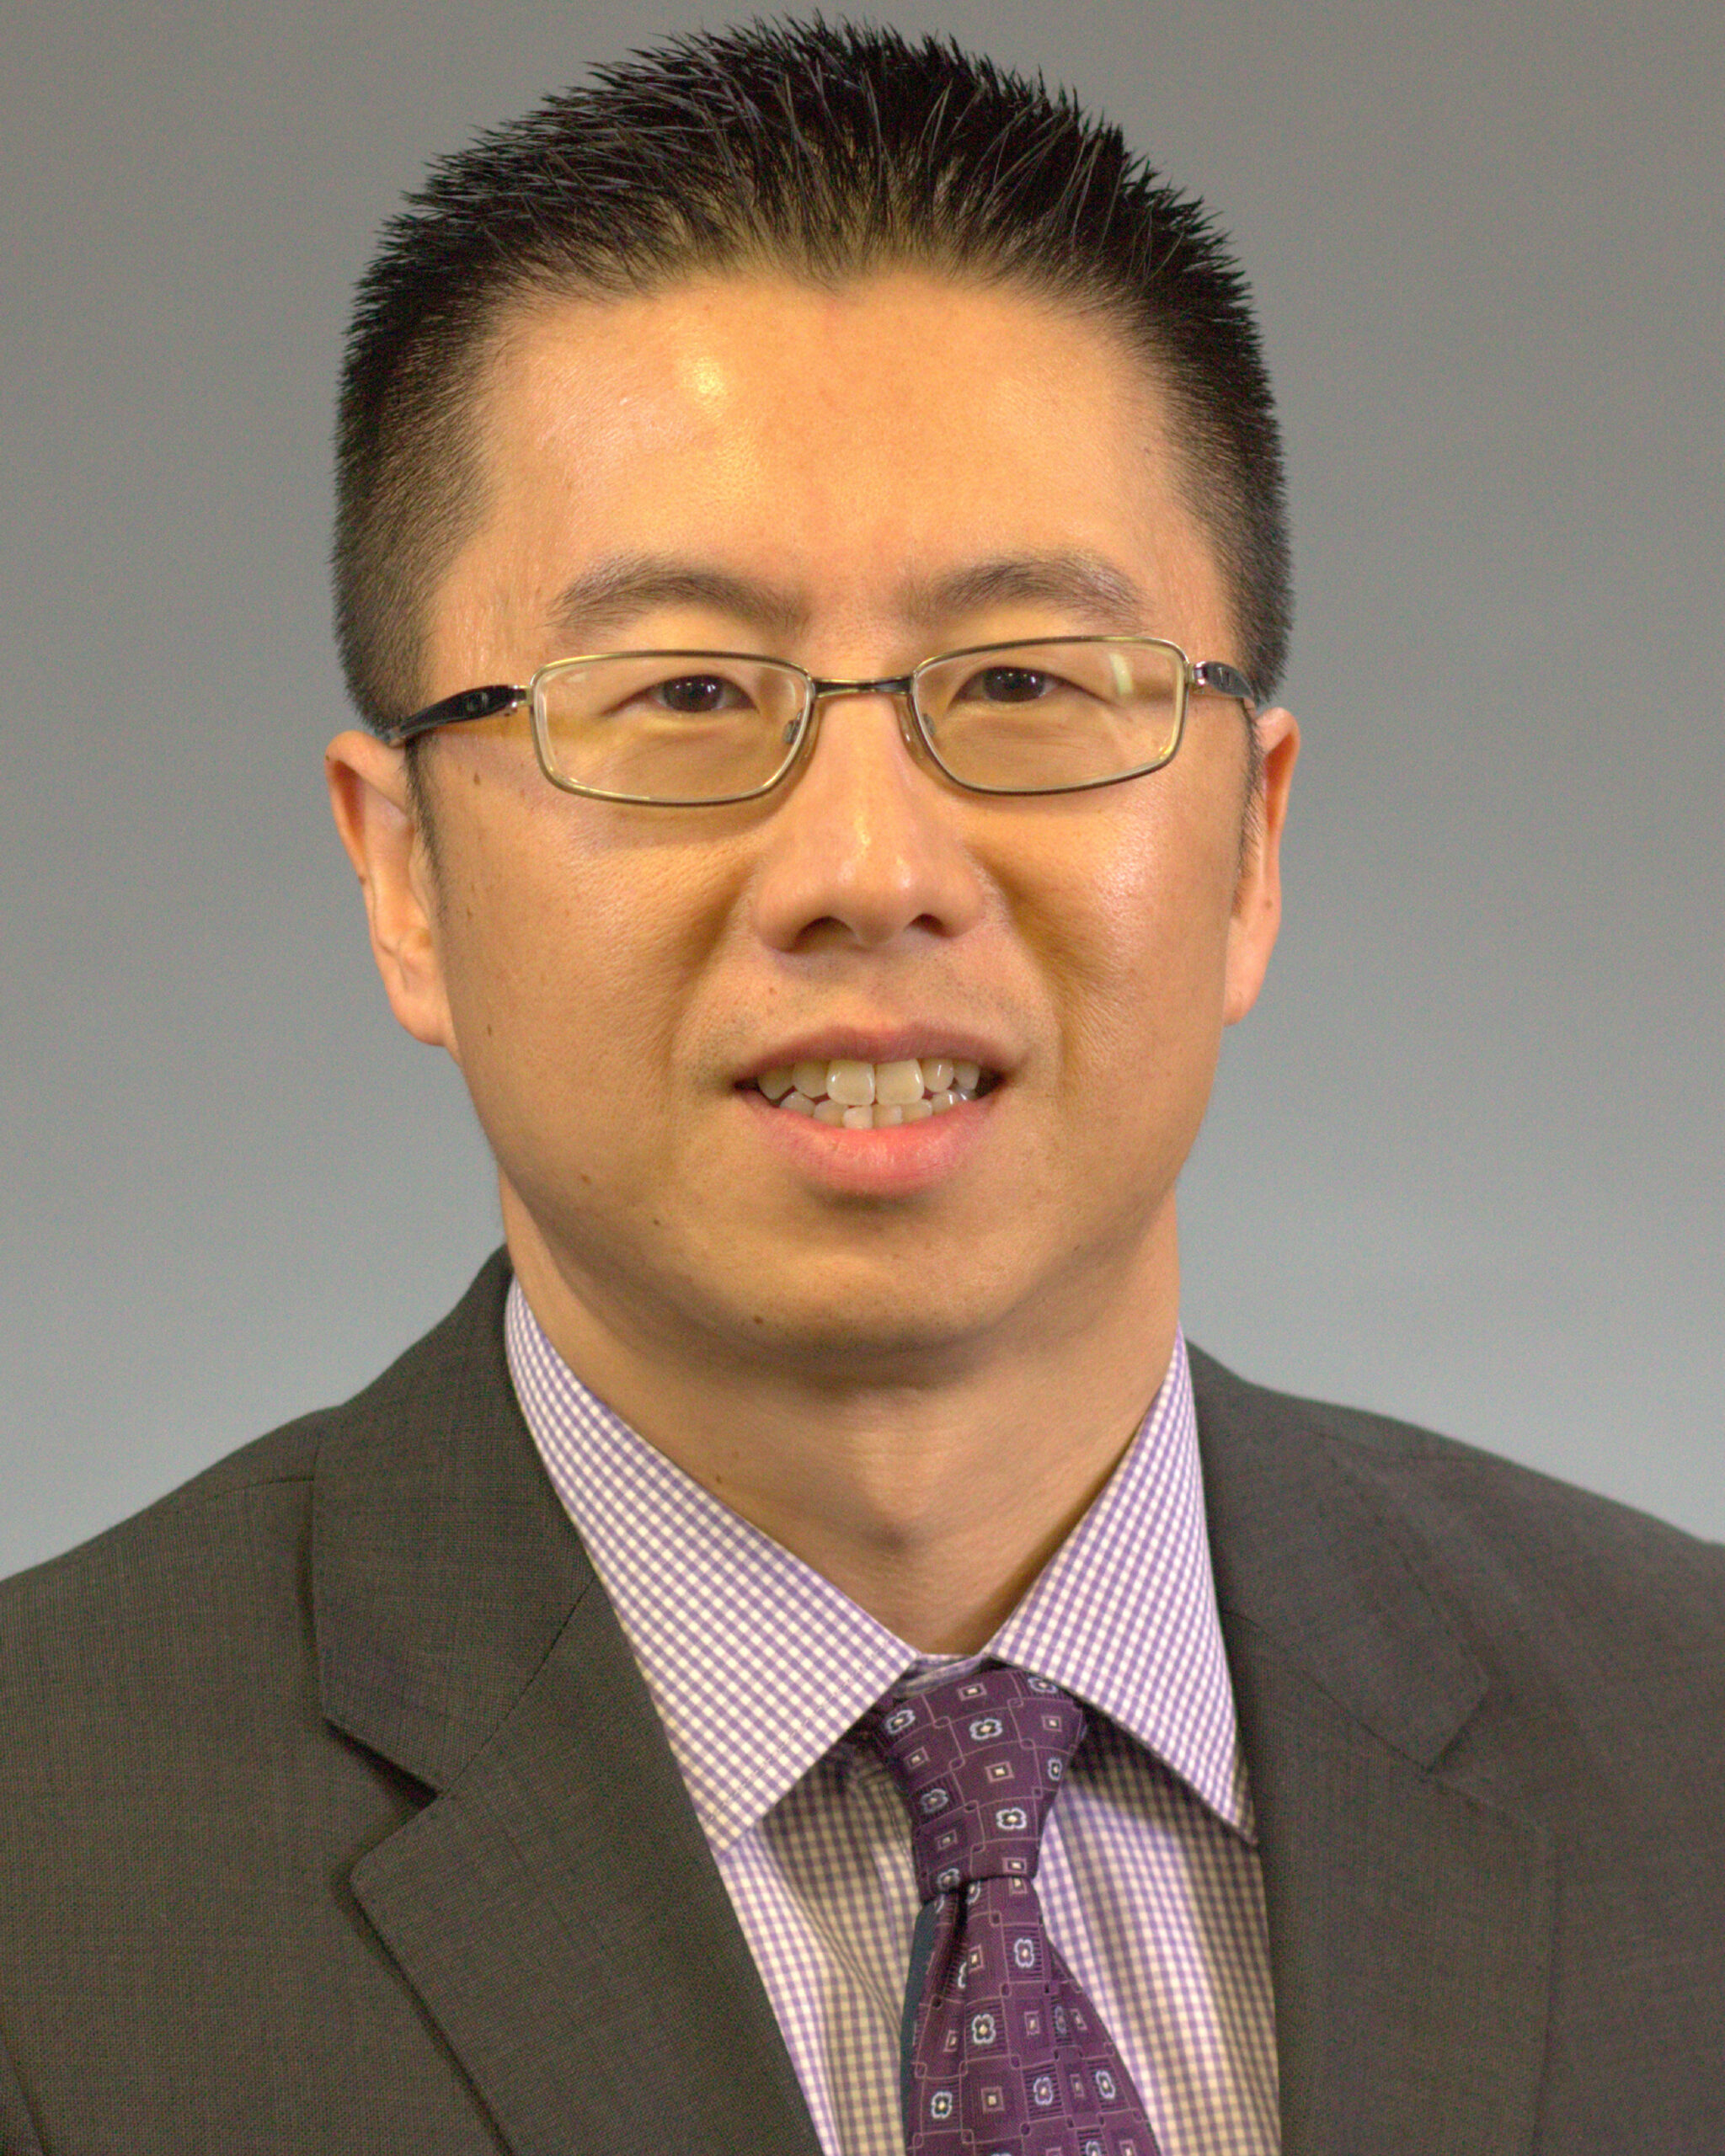 Joel Kan, associate vice president of economic and industry forecasting for the Mortgage Bankers Association.